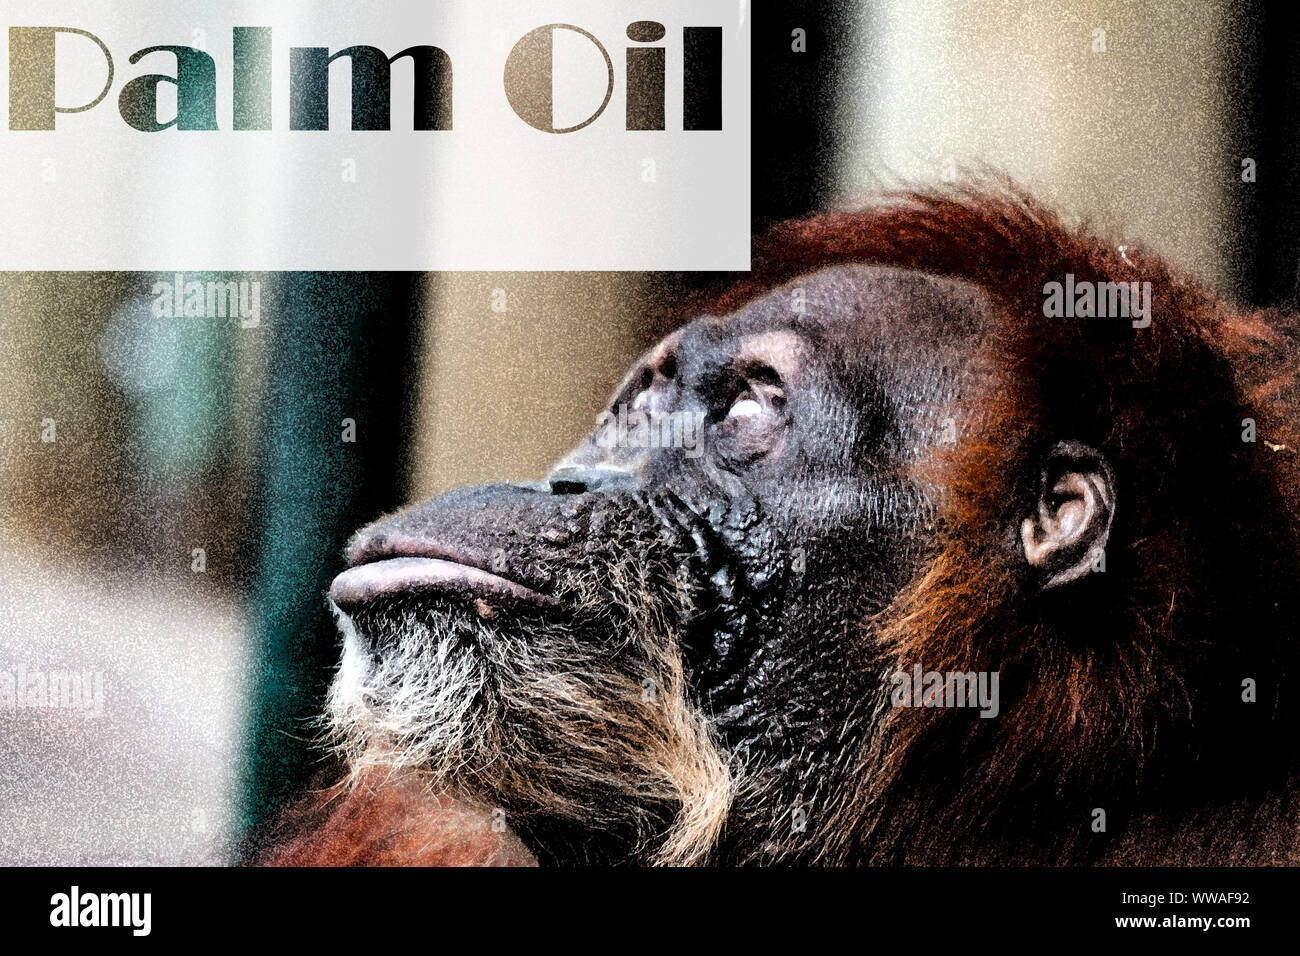 An Orangutan looking at the words palm oil. Deforestation: Borneo tropical rainforest is destroyed for oil palm plantations and human development. Stock Photo